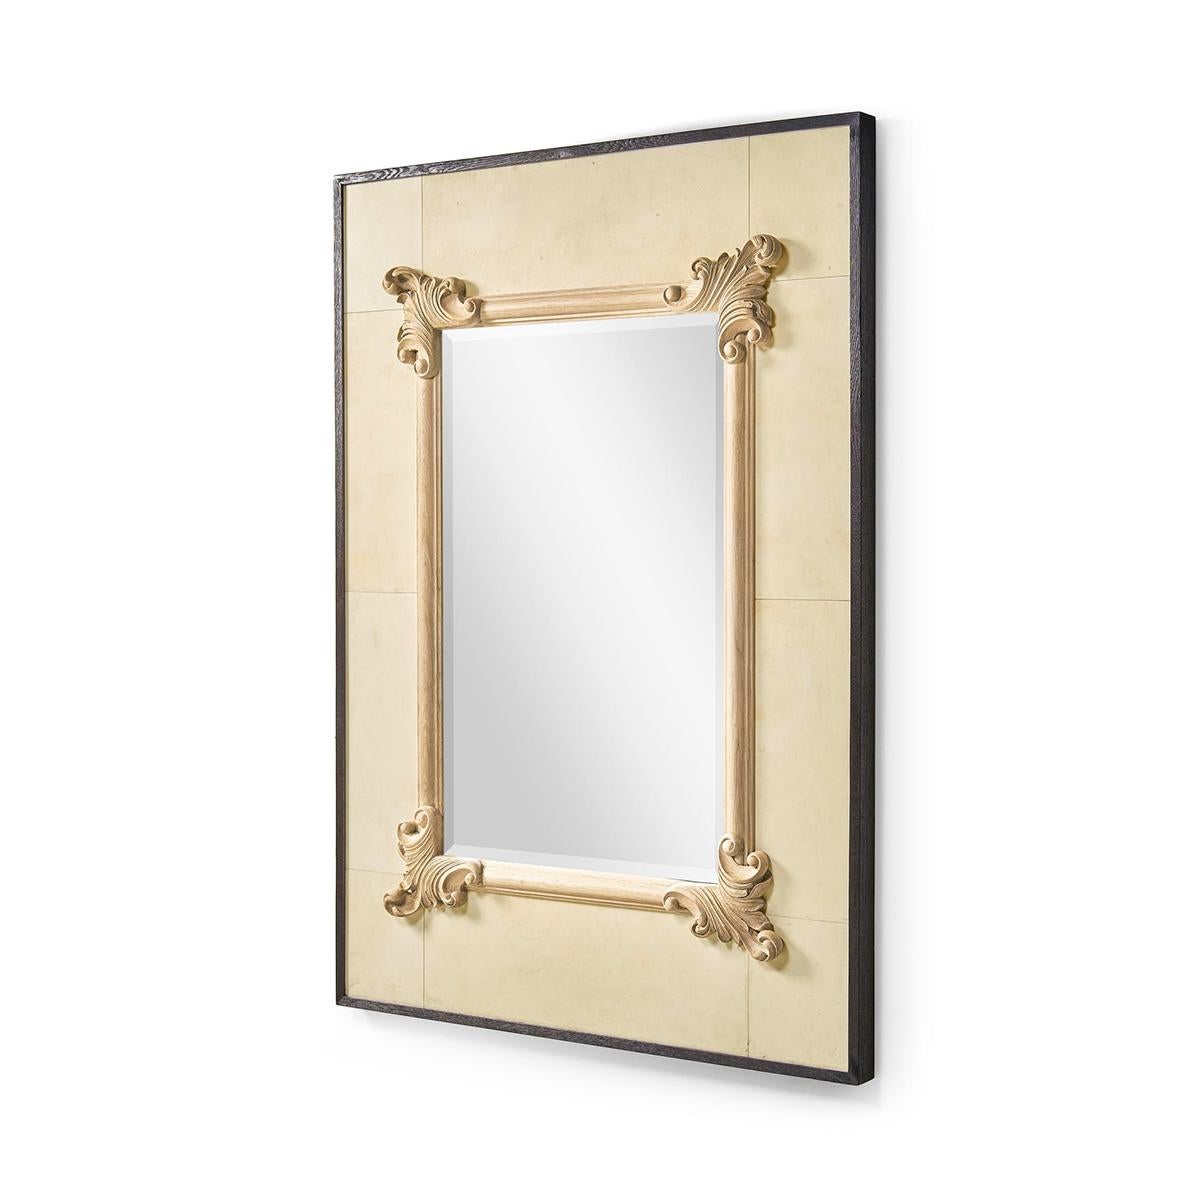 A true testament to classical beauty and modern craftsmanship. This mirror is not just for reflection; it serves as a stunning piece of art that adds depth, character, and a grandiose touch to any room.

Featuring a hand-carved solid oak frame with